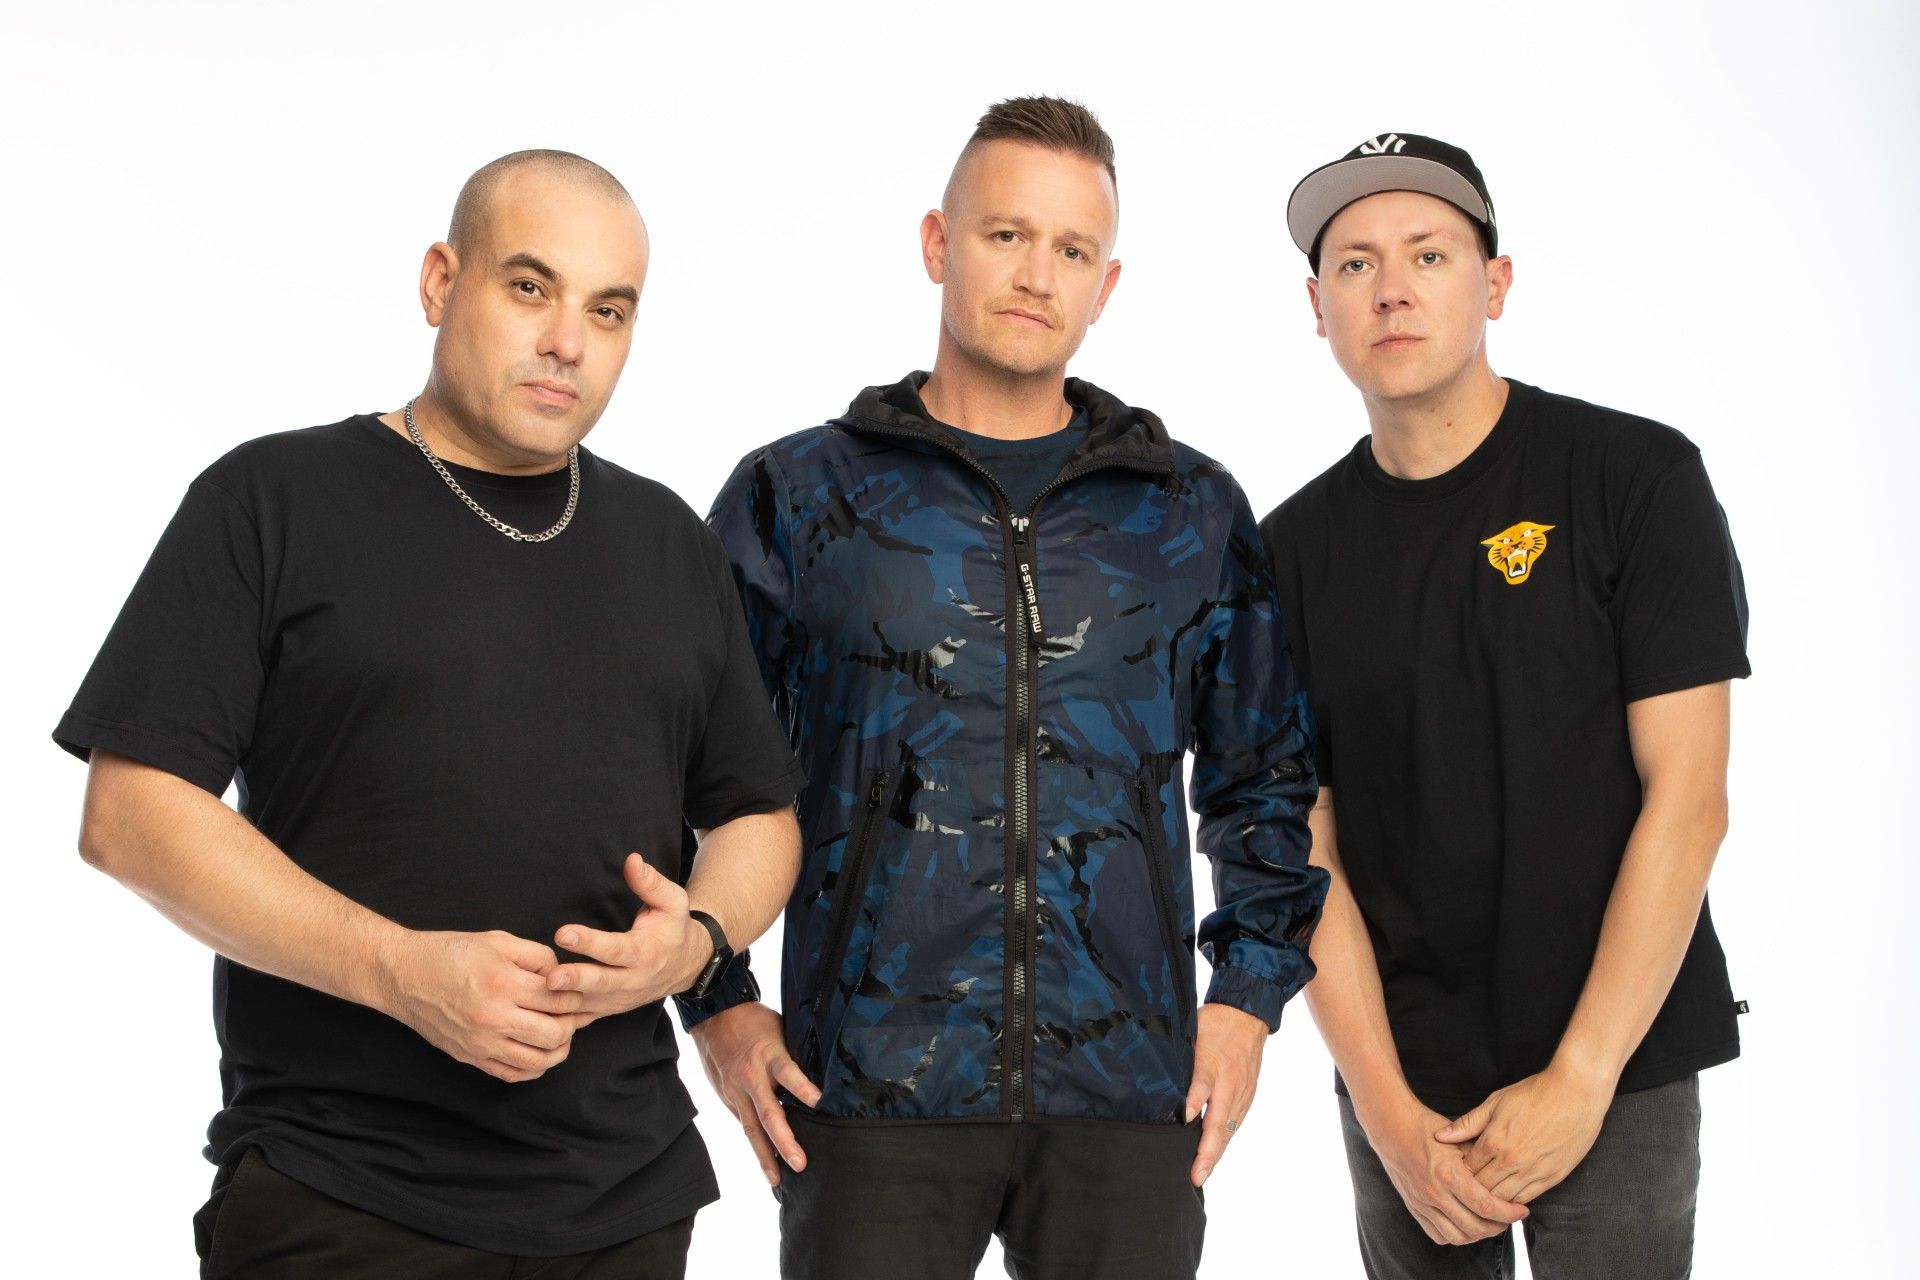 Hilltop Hoods Return with New Single & Video ‘Show Business’ feat. Eamon – Out Today